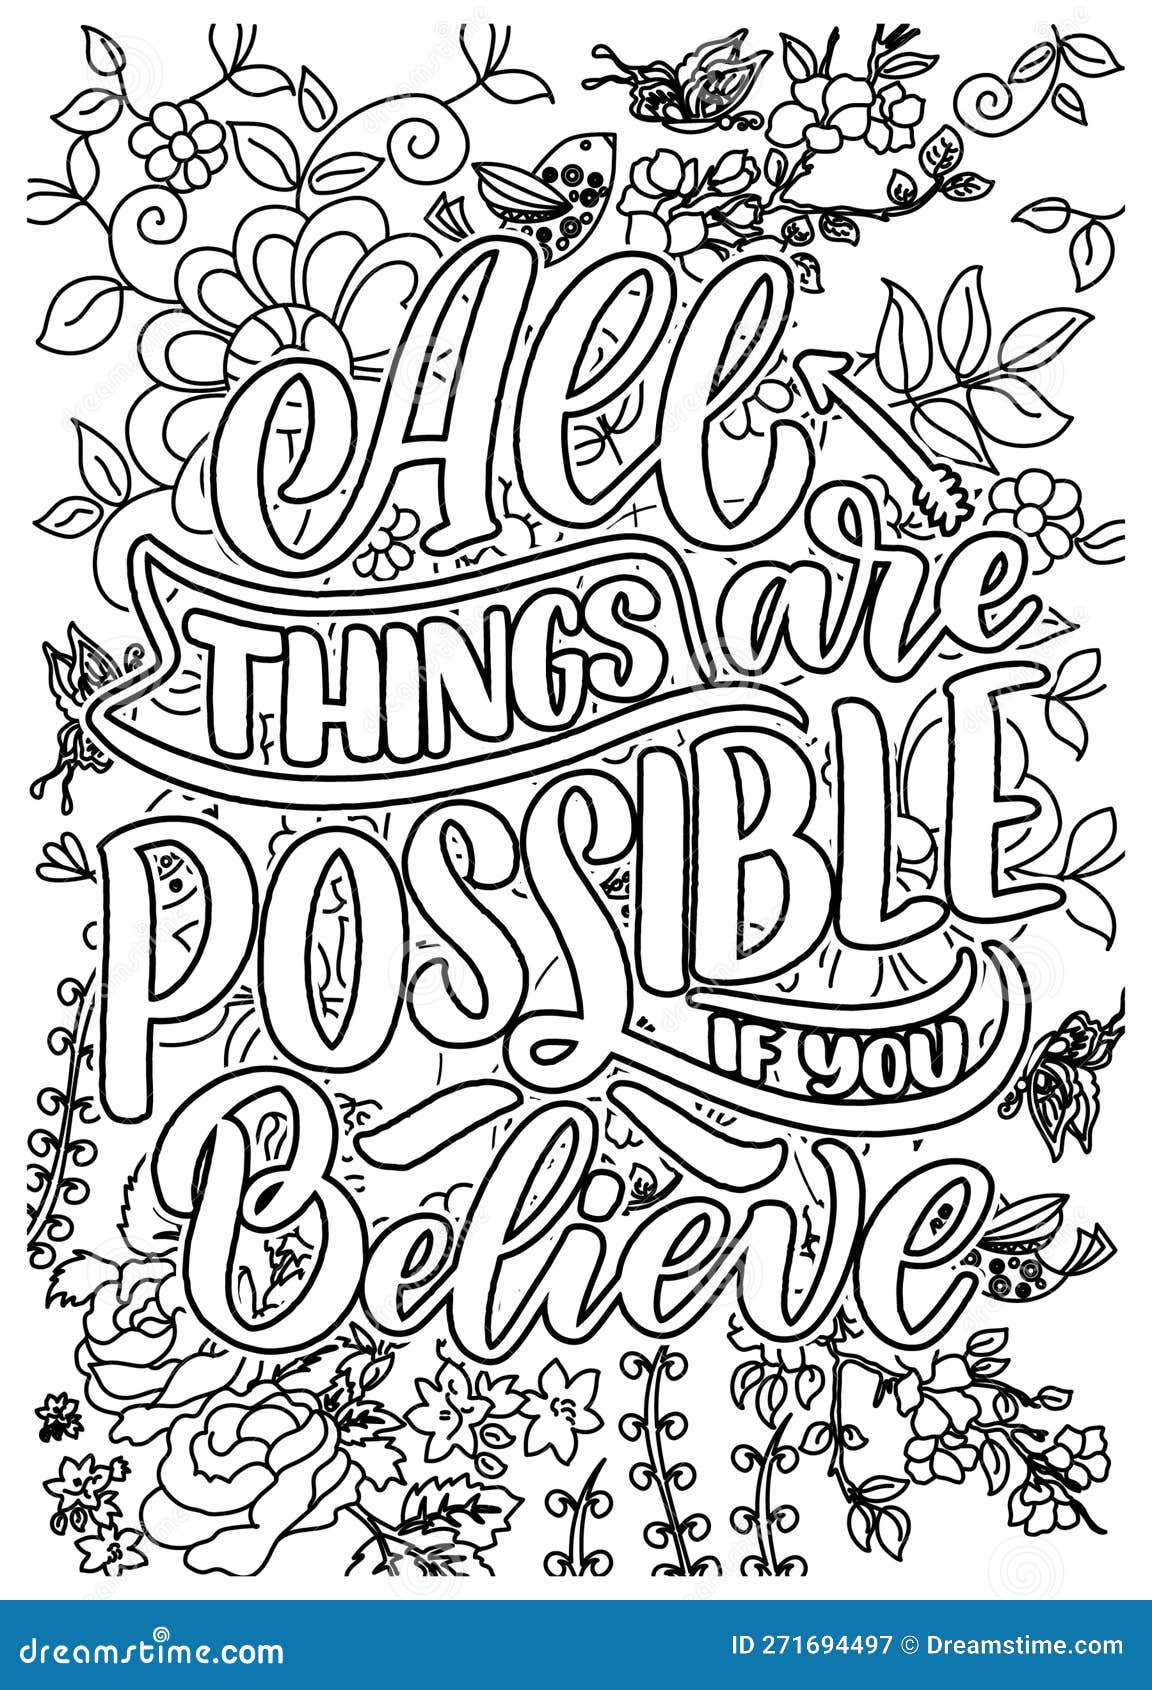 Dream quote coloring pages for adults dream coloring page design stock illustration